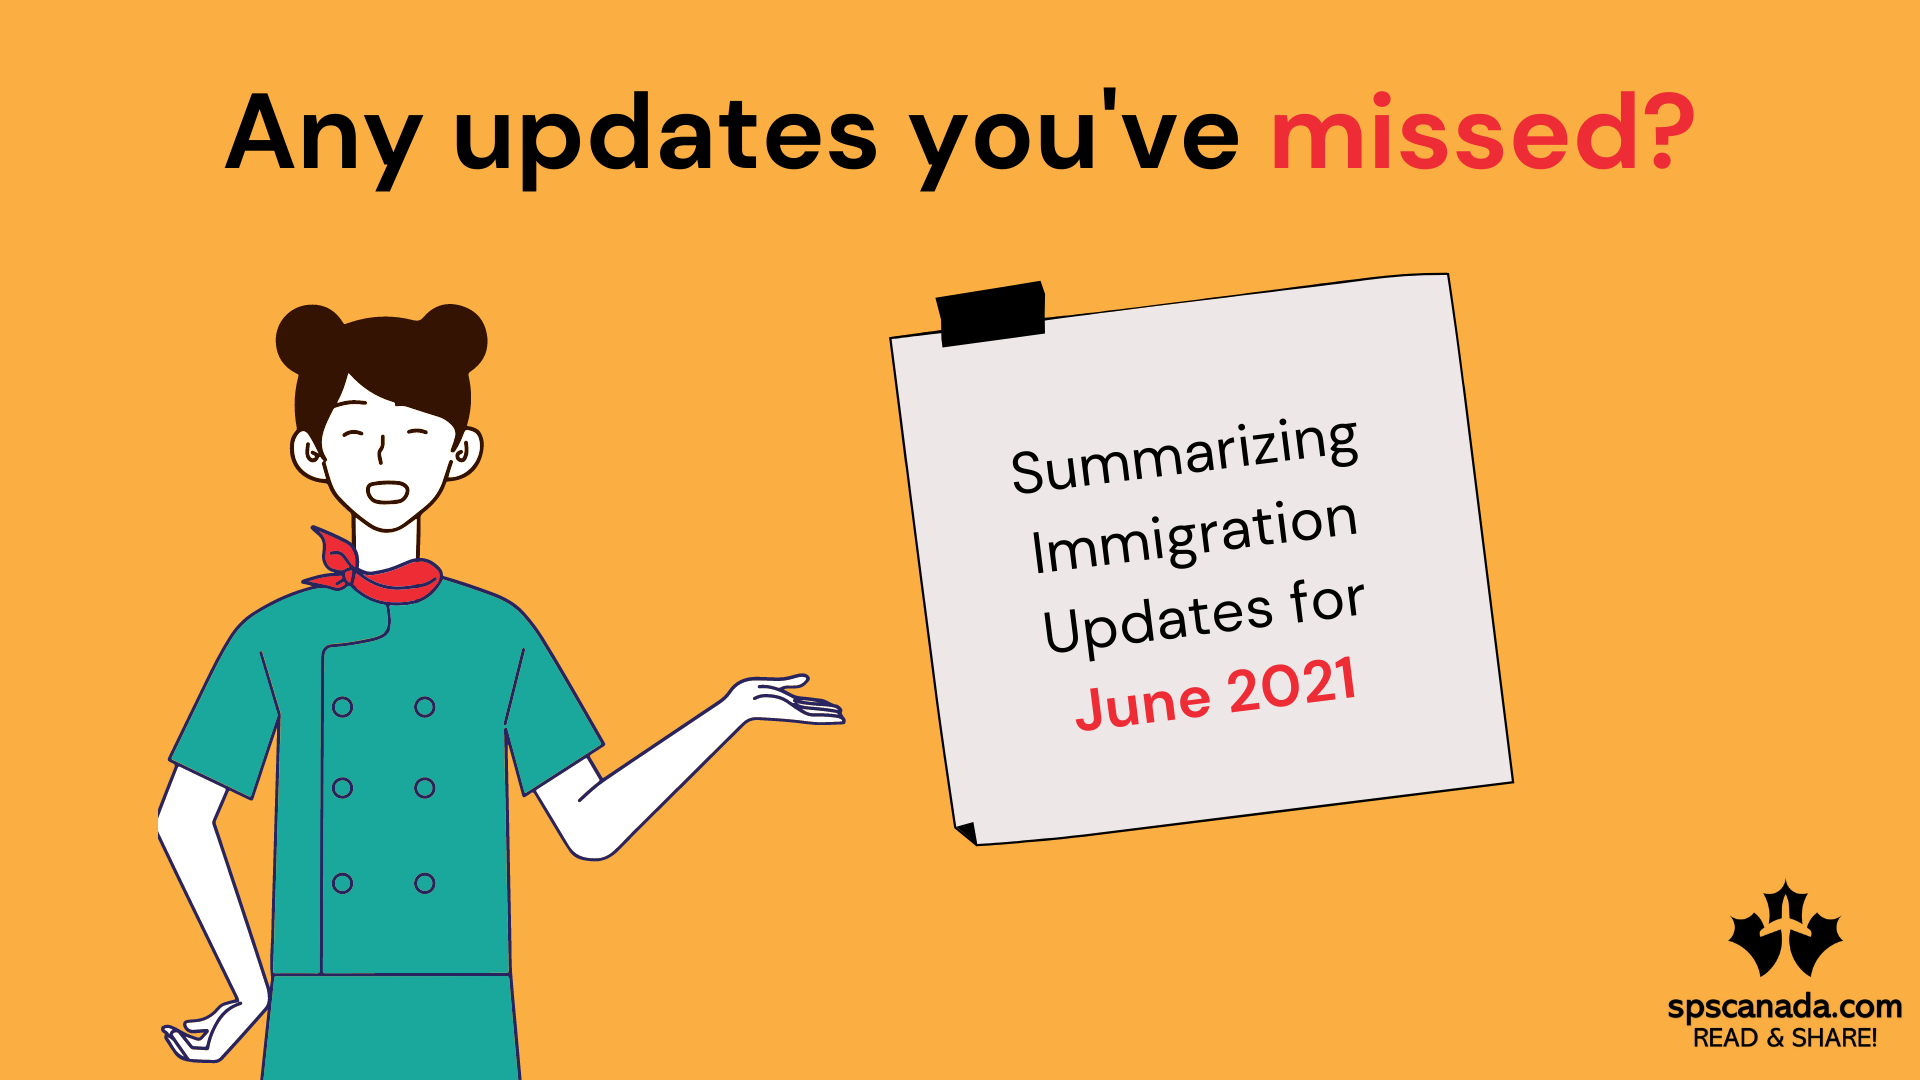 Month-end Immigration Updates for June 2021 – What Did You Miss?